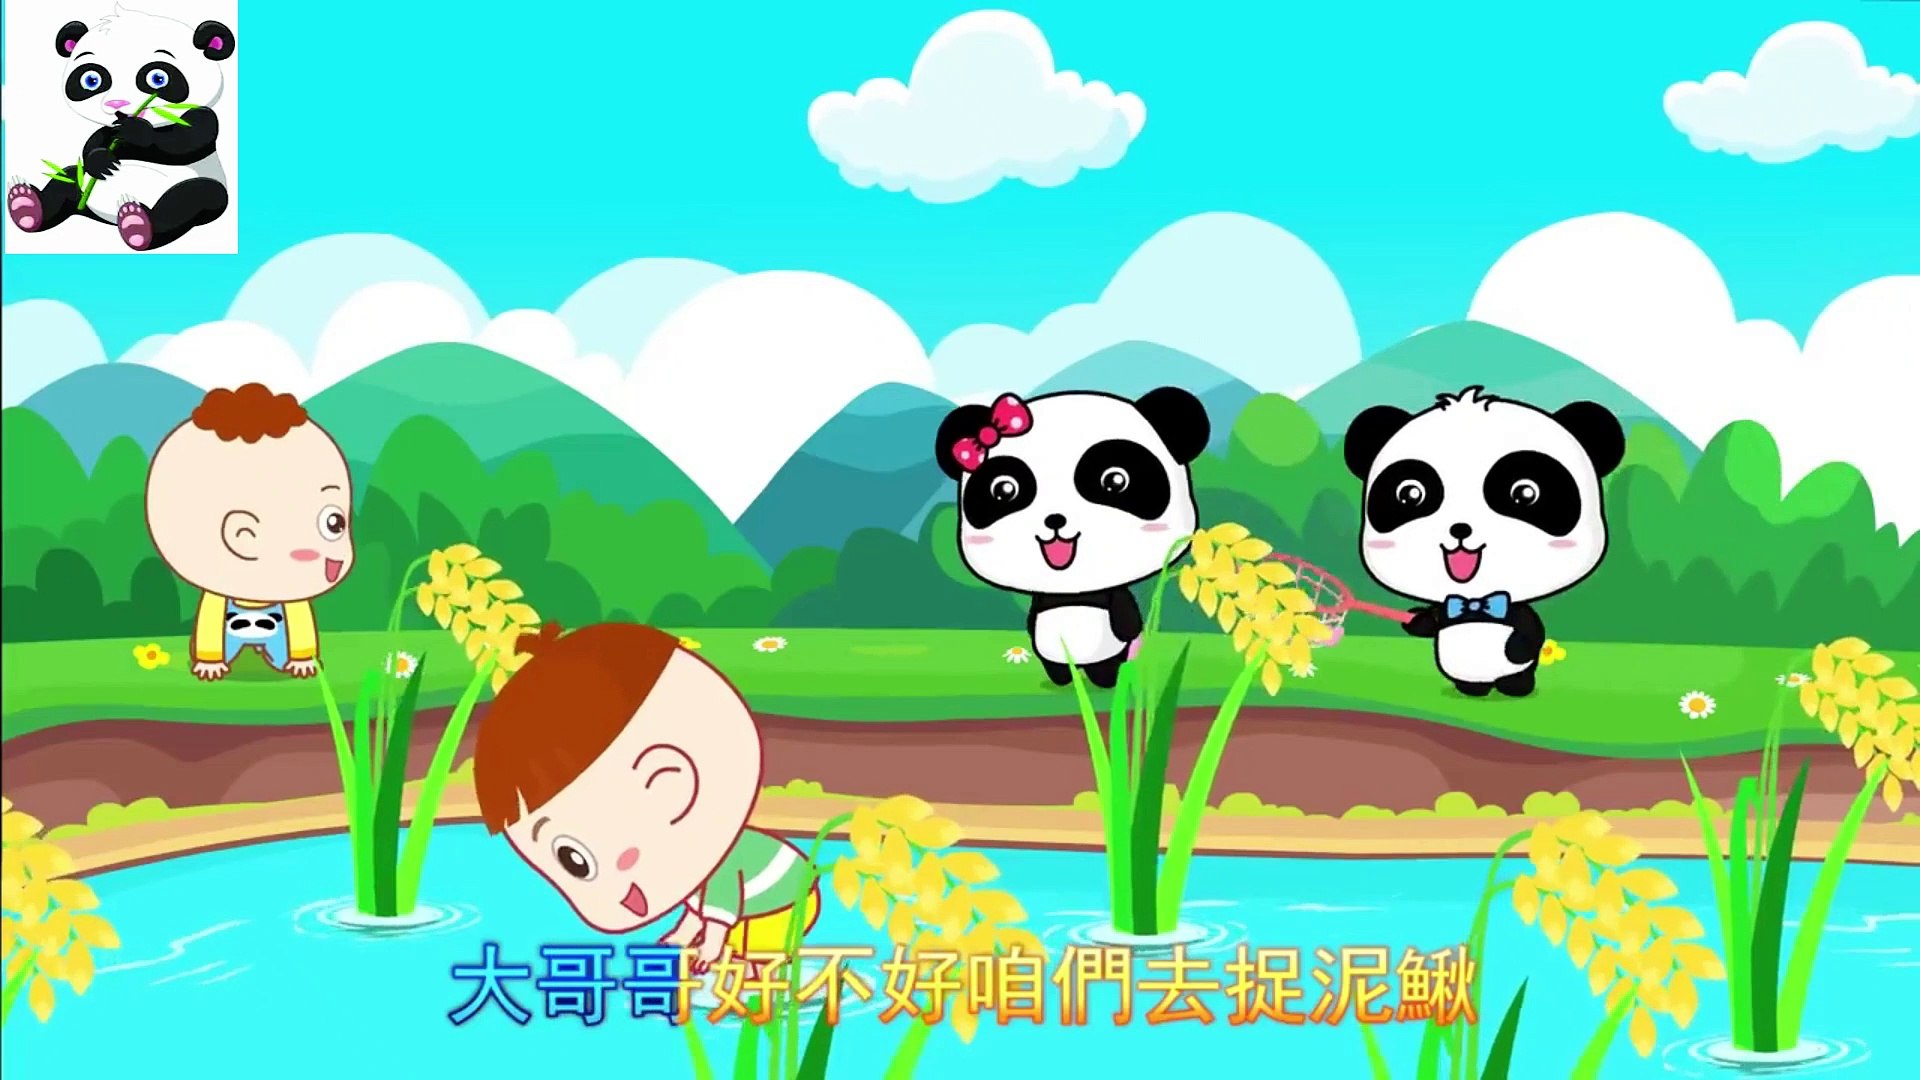 Baby Bus - Two Tigers Song and Chinese Kids Nursery Rhyme (4)  婴儿巴士-两只老虎歌和中国童谣 - video Dailymotion